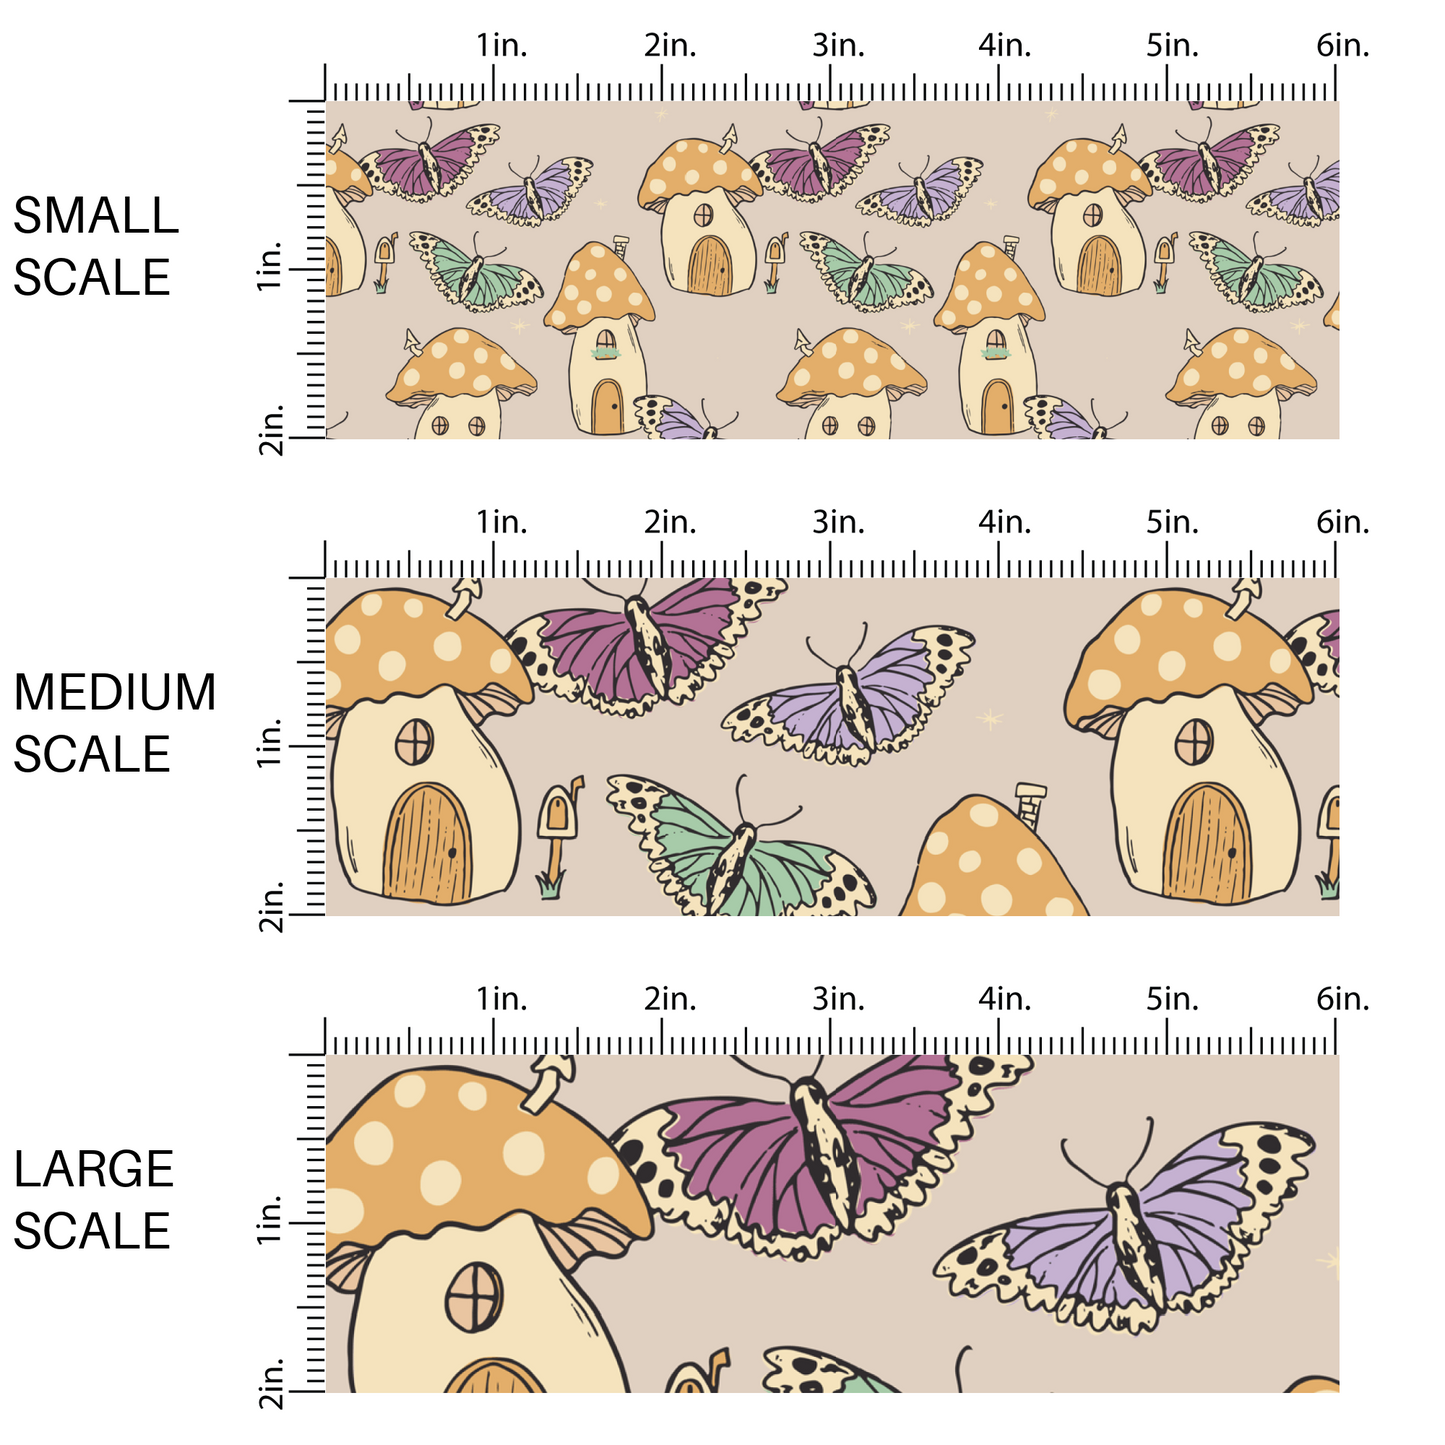 This scale chart of small scale, medium scale and large scale of these enchanted themed light cream fabric by the yard features mushroom homes and butterflies in lavender, mint, orange, pink, and cream. This fun summer themed fabric can be used for all your sewing and crafting needs! 